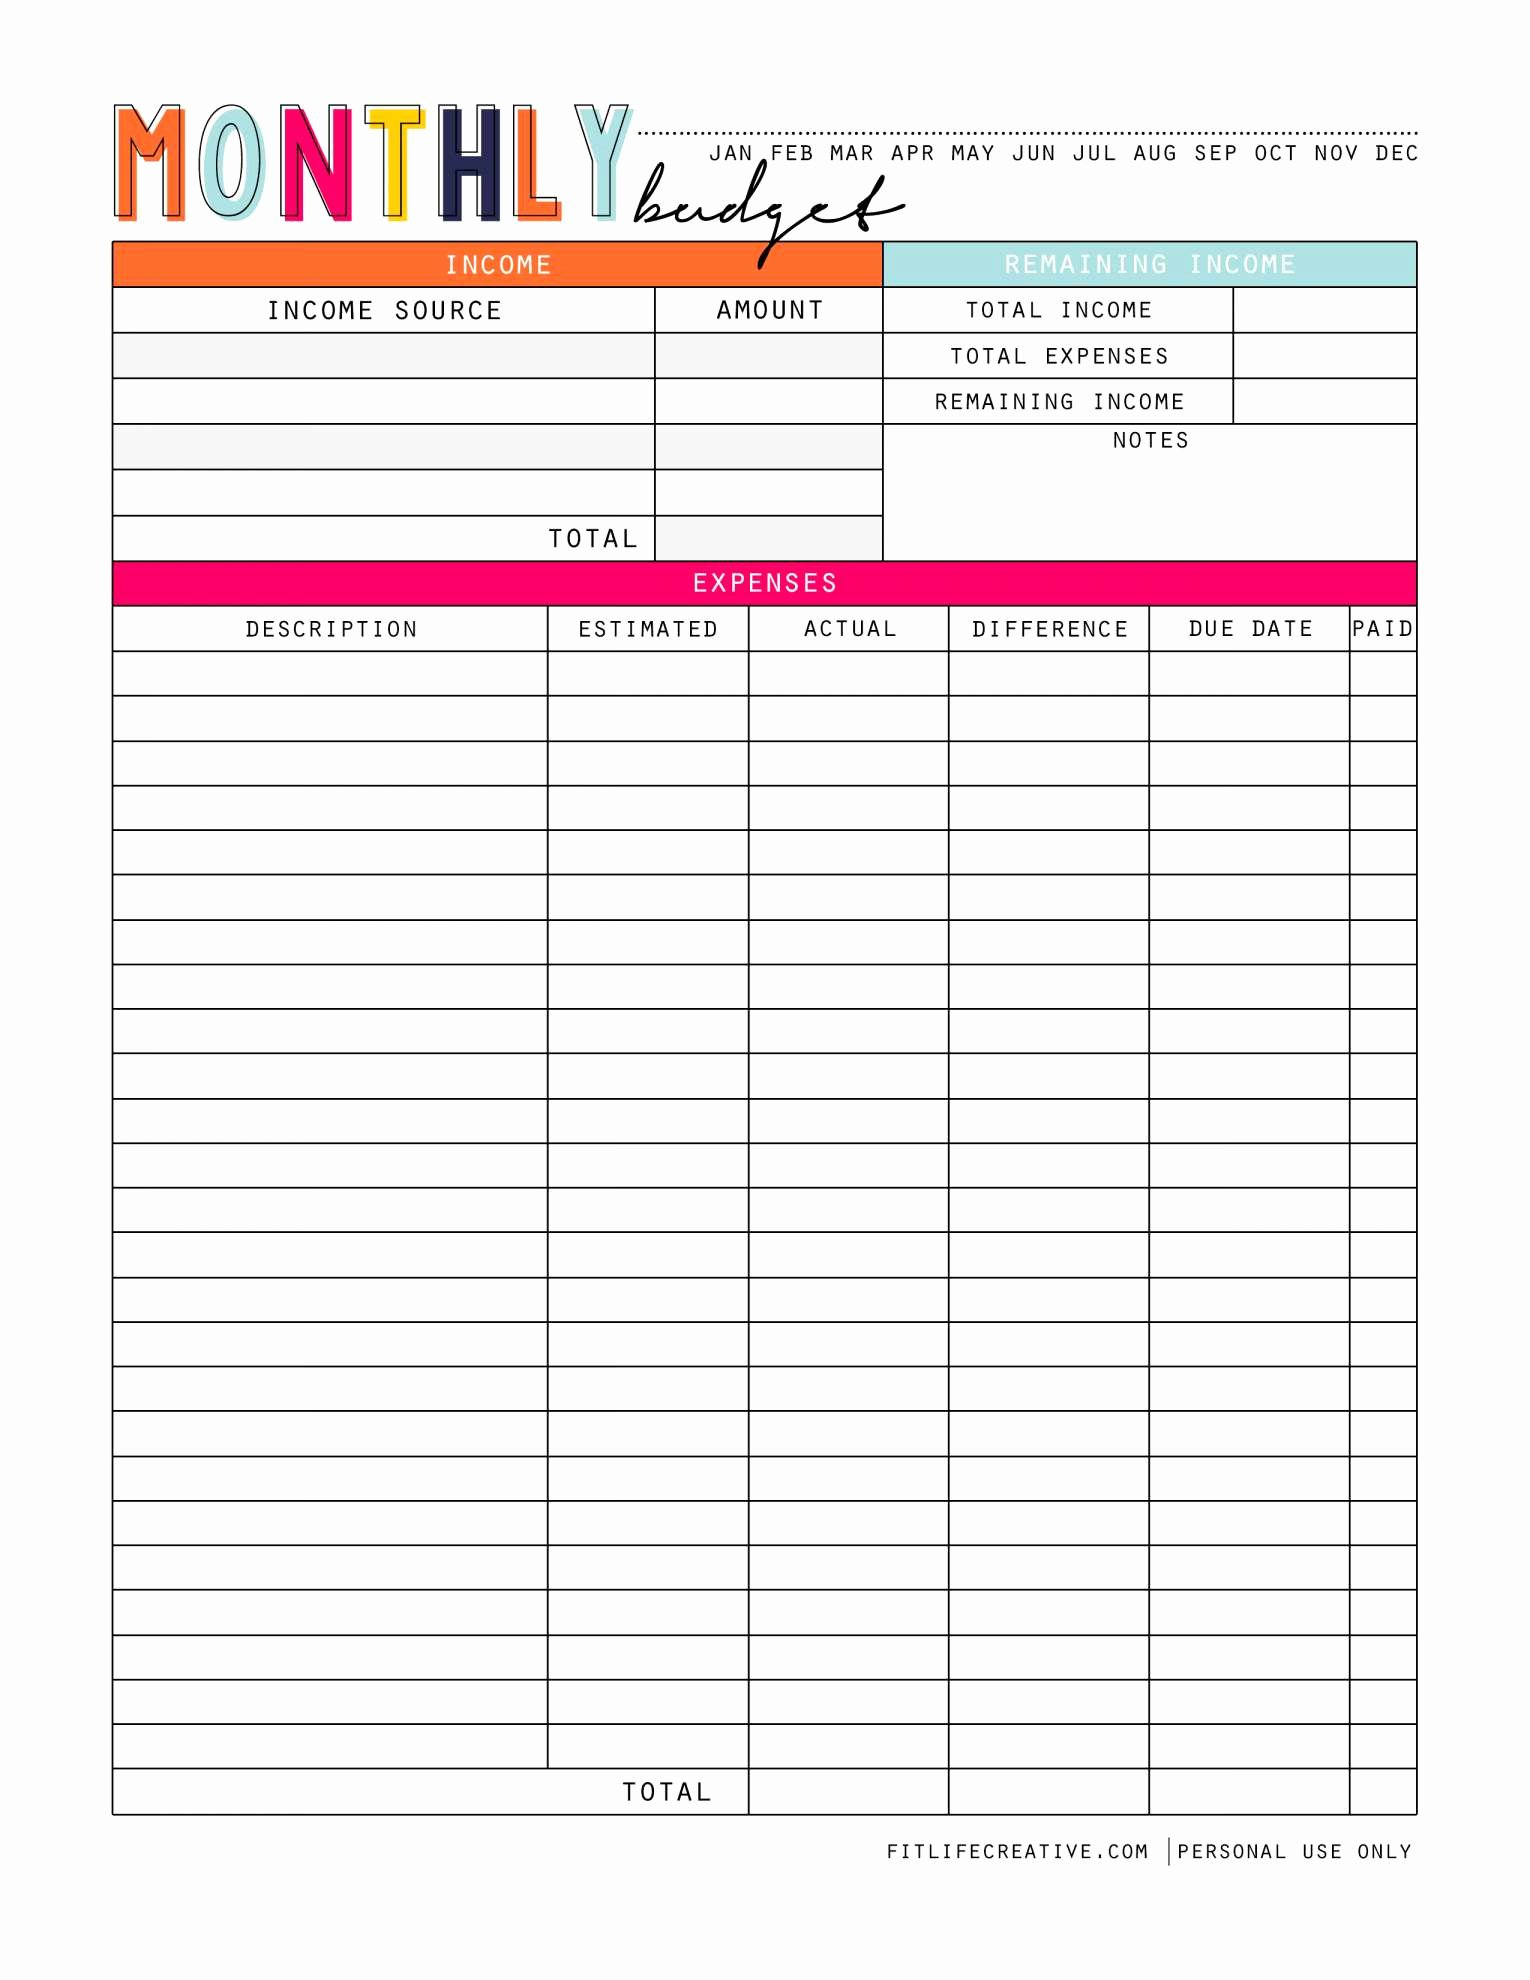 How To Make Monthly Budget Spreadsheet For Business Expense Family Regarding Monthly Budget Worksheet Pdf